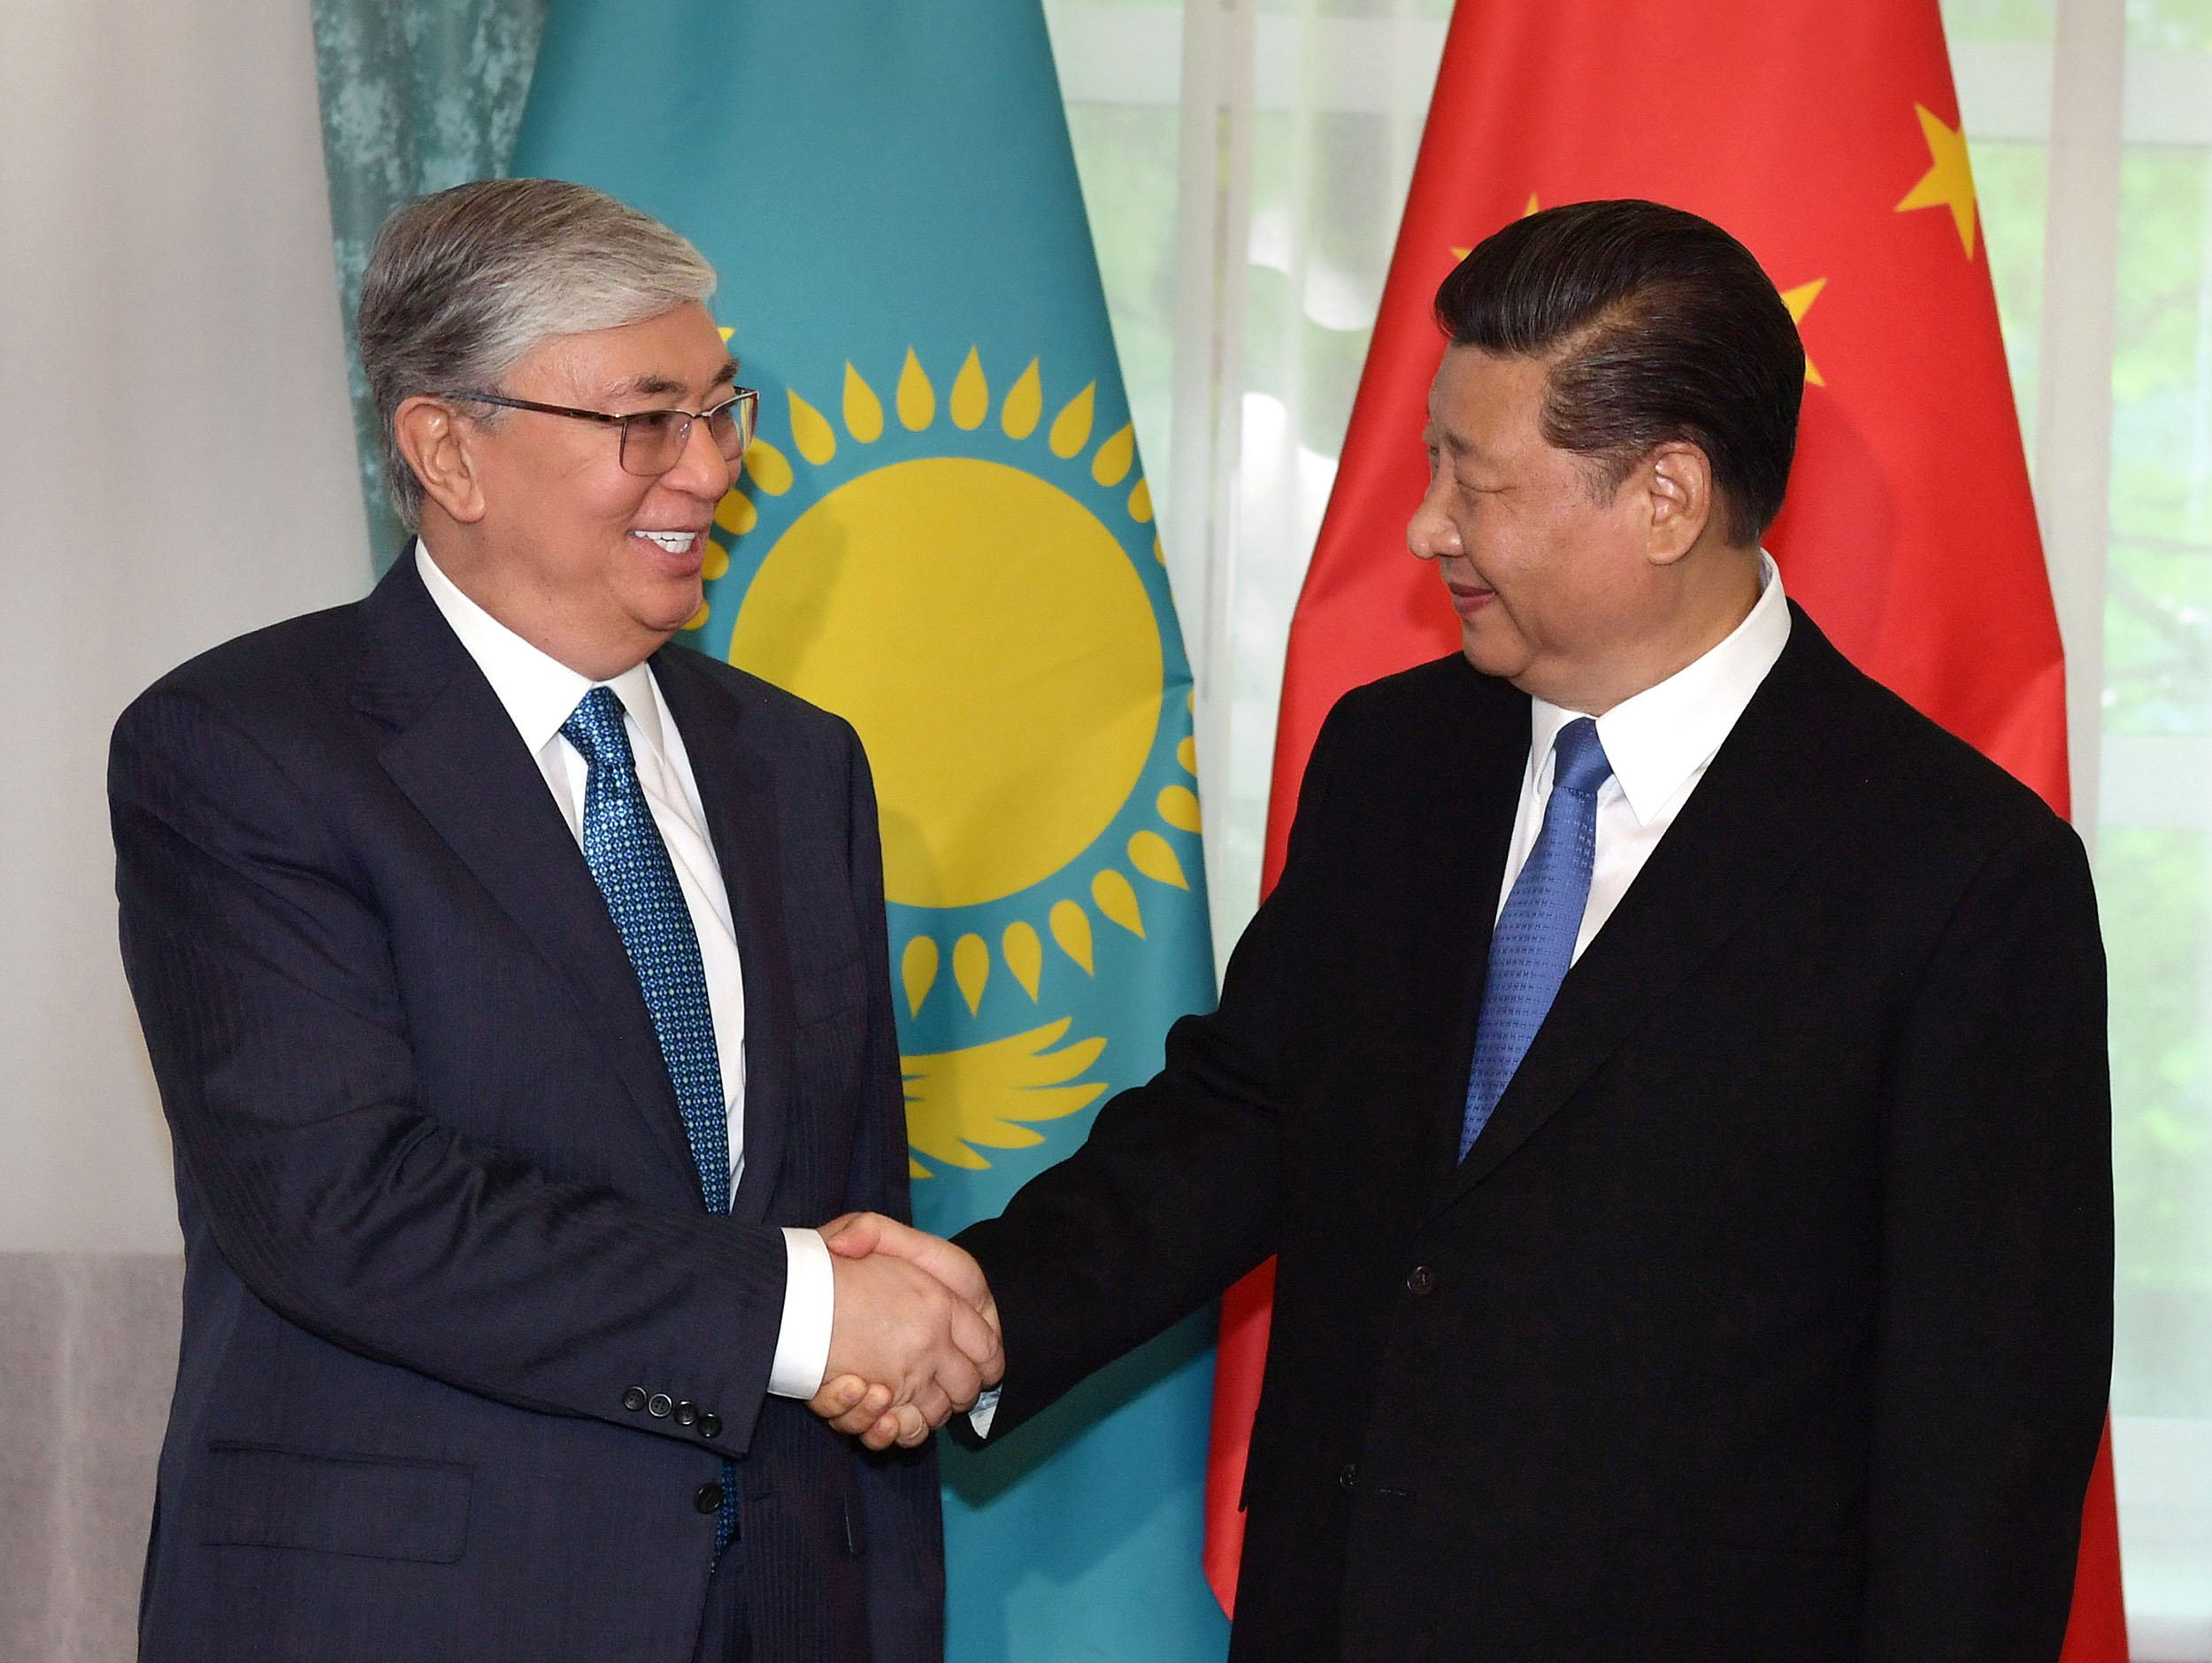 Kassym-Jomart Tokayev meets with Xi Jinping, President of the People's Republic of China